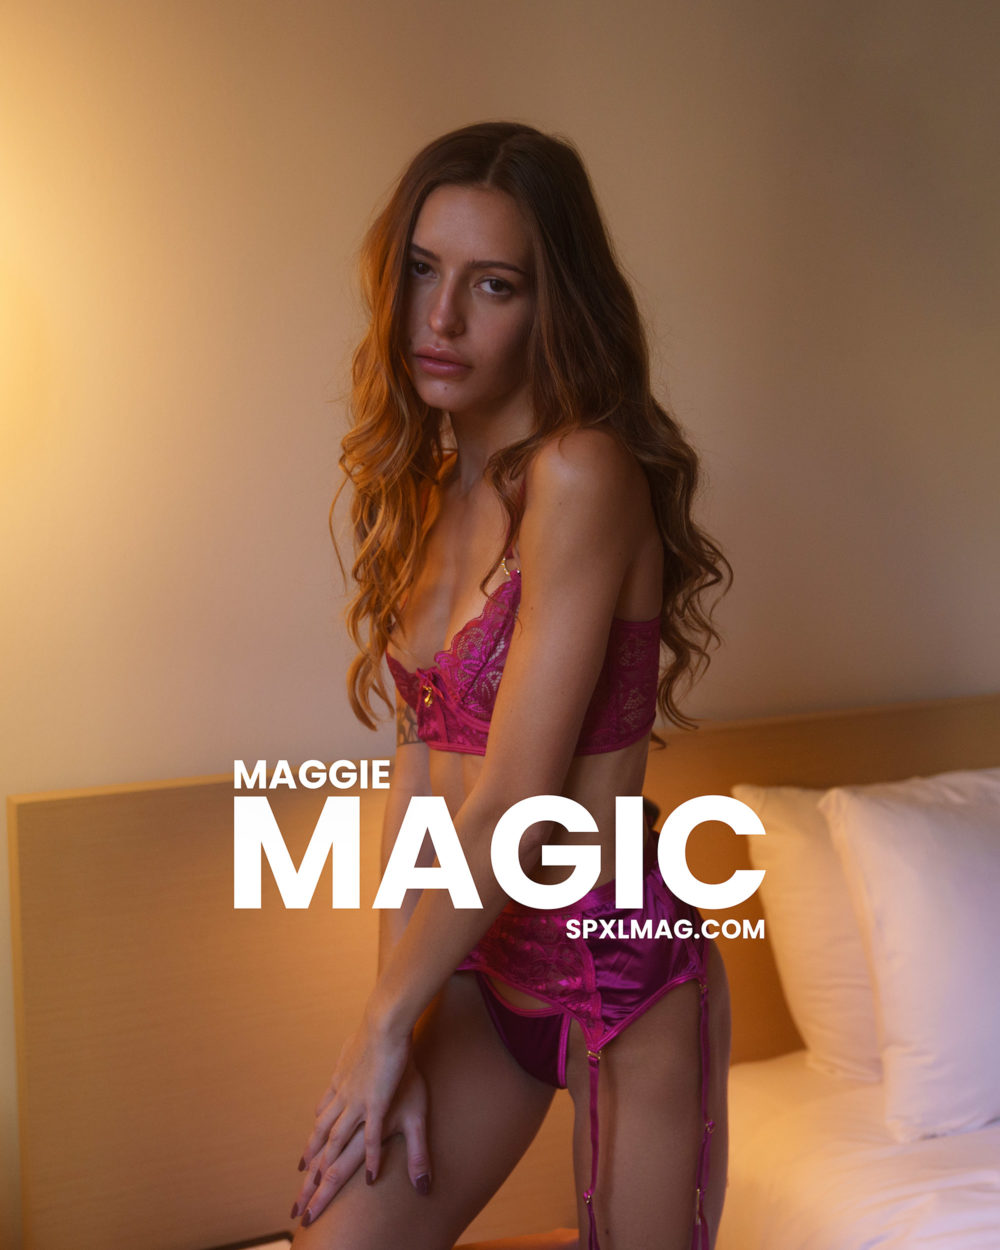 maggie-magic-spxlmag-product-cover-DSC09111